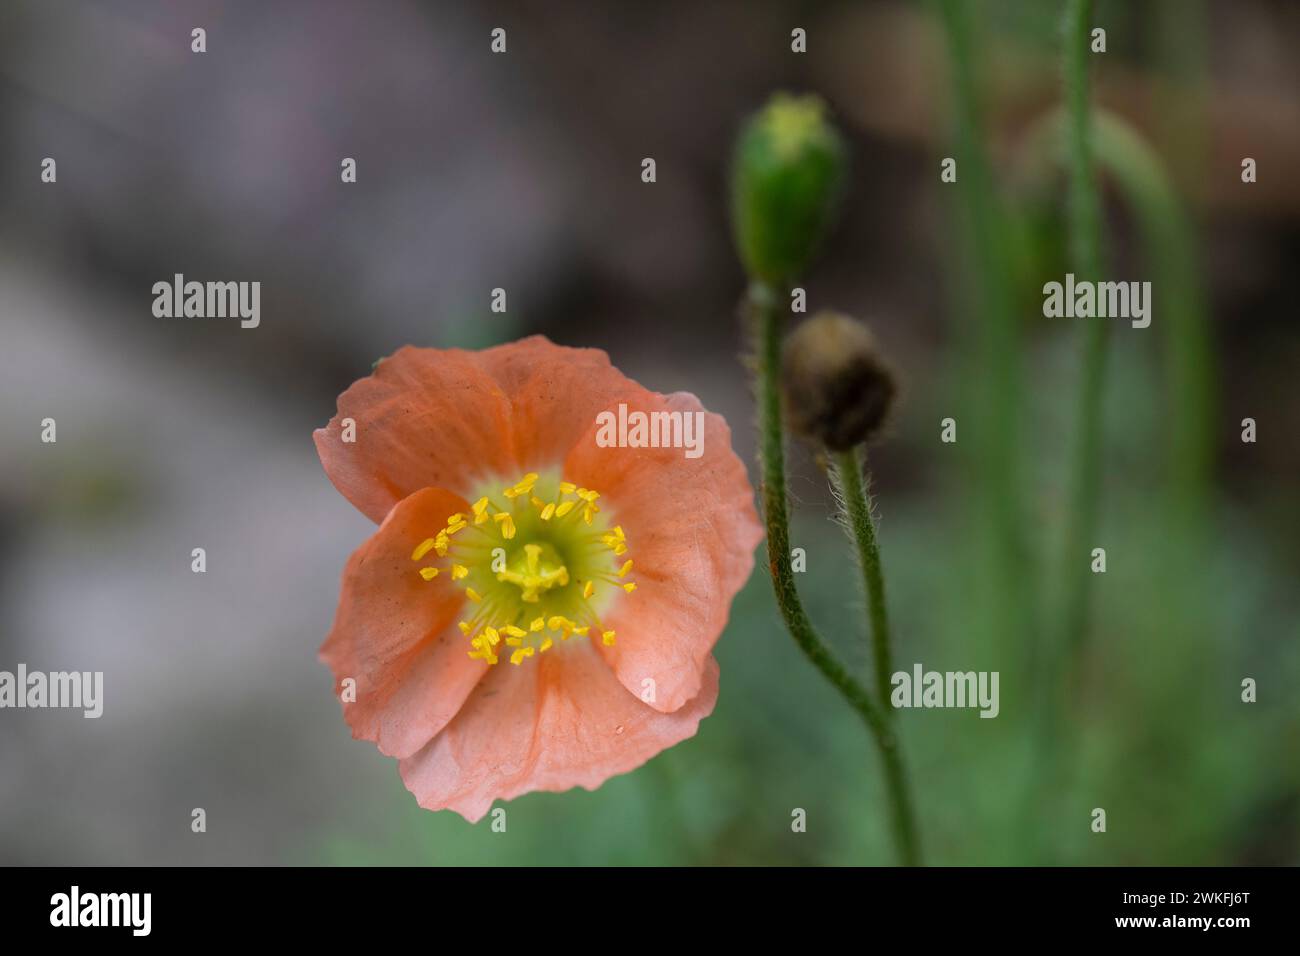 Iceland Poppy, Arctic Poppy, Papaver nudicuale,  flowering in cottage garden, close-up, macro shot, detailed Stock Photo